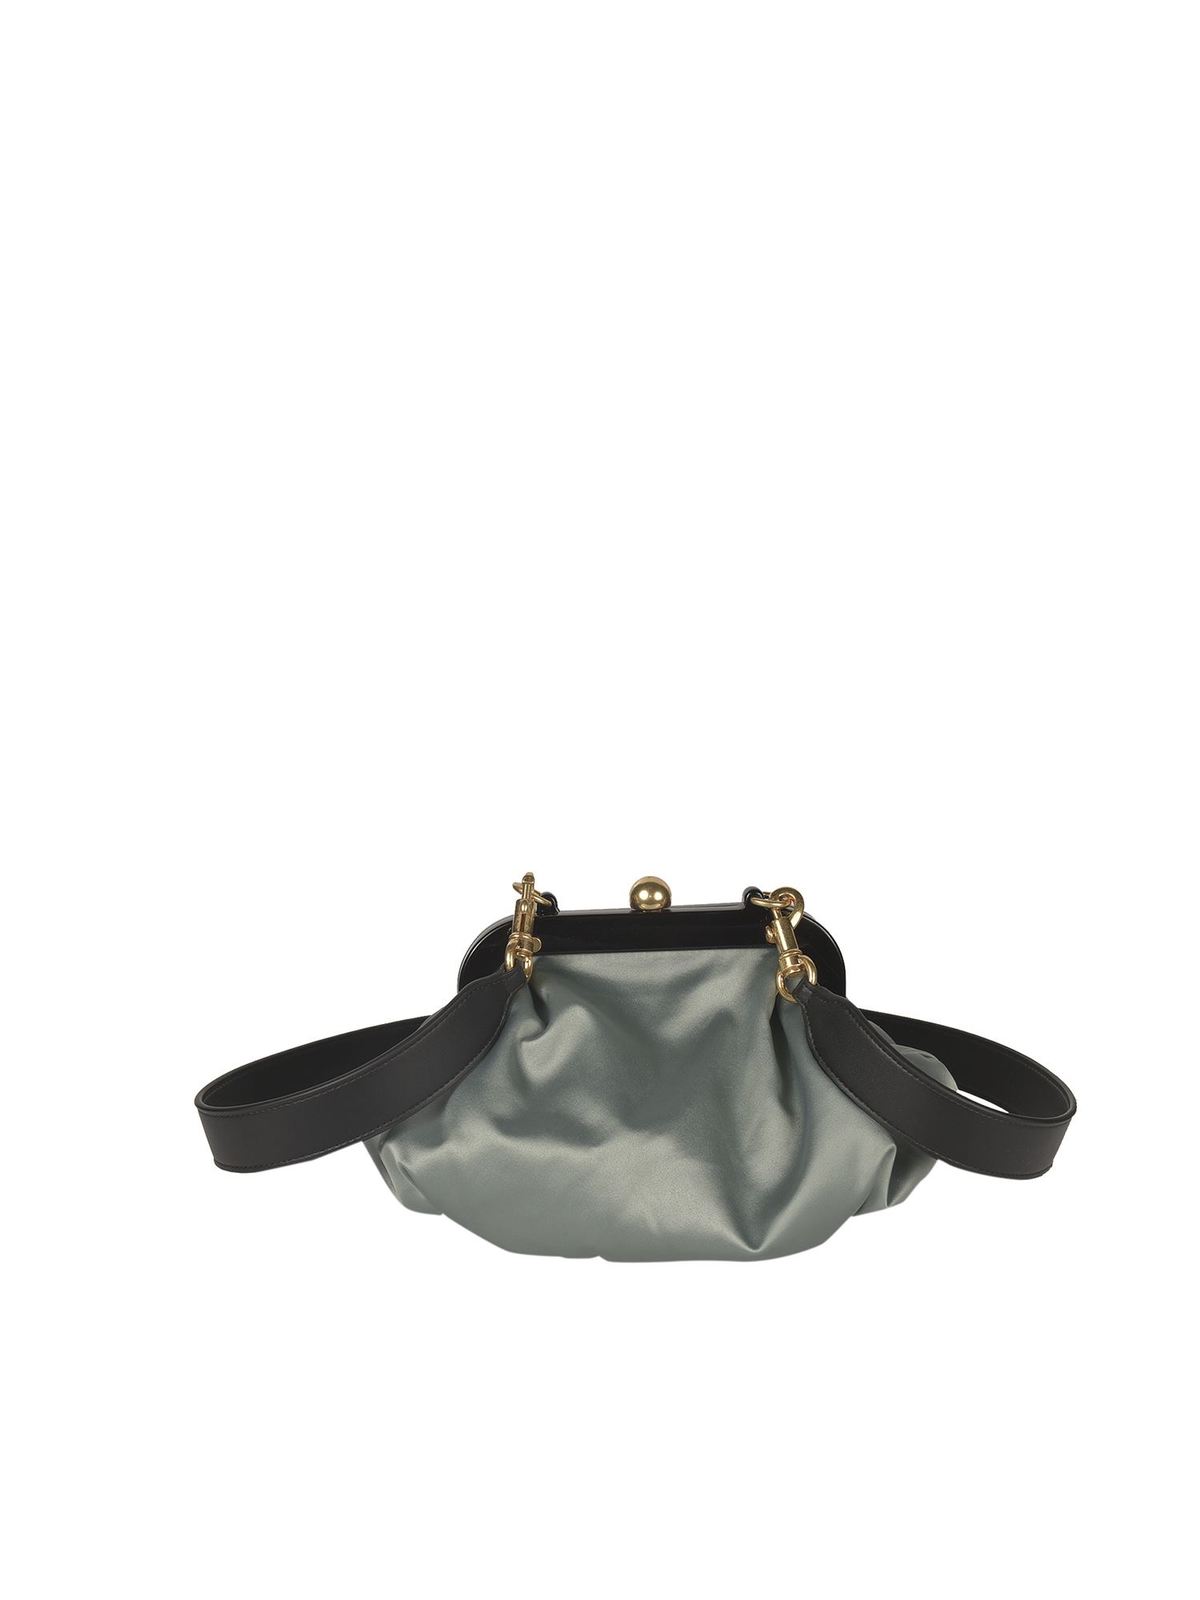 SEE BY CHLOÉ TILLY SMALL CLUTCH BAG IN MISTY FOREST COLOR